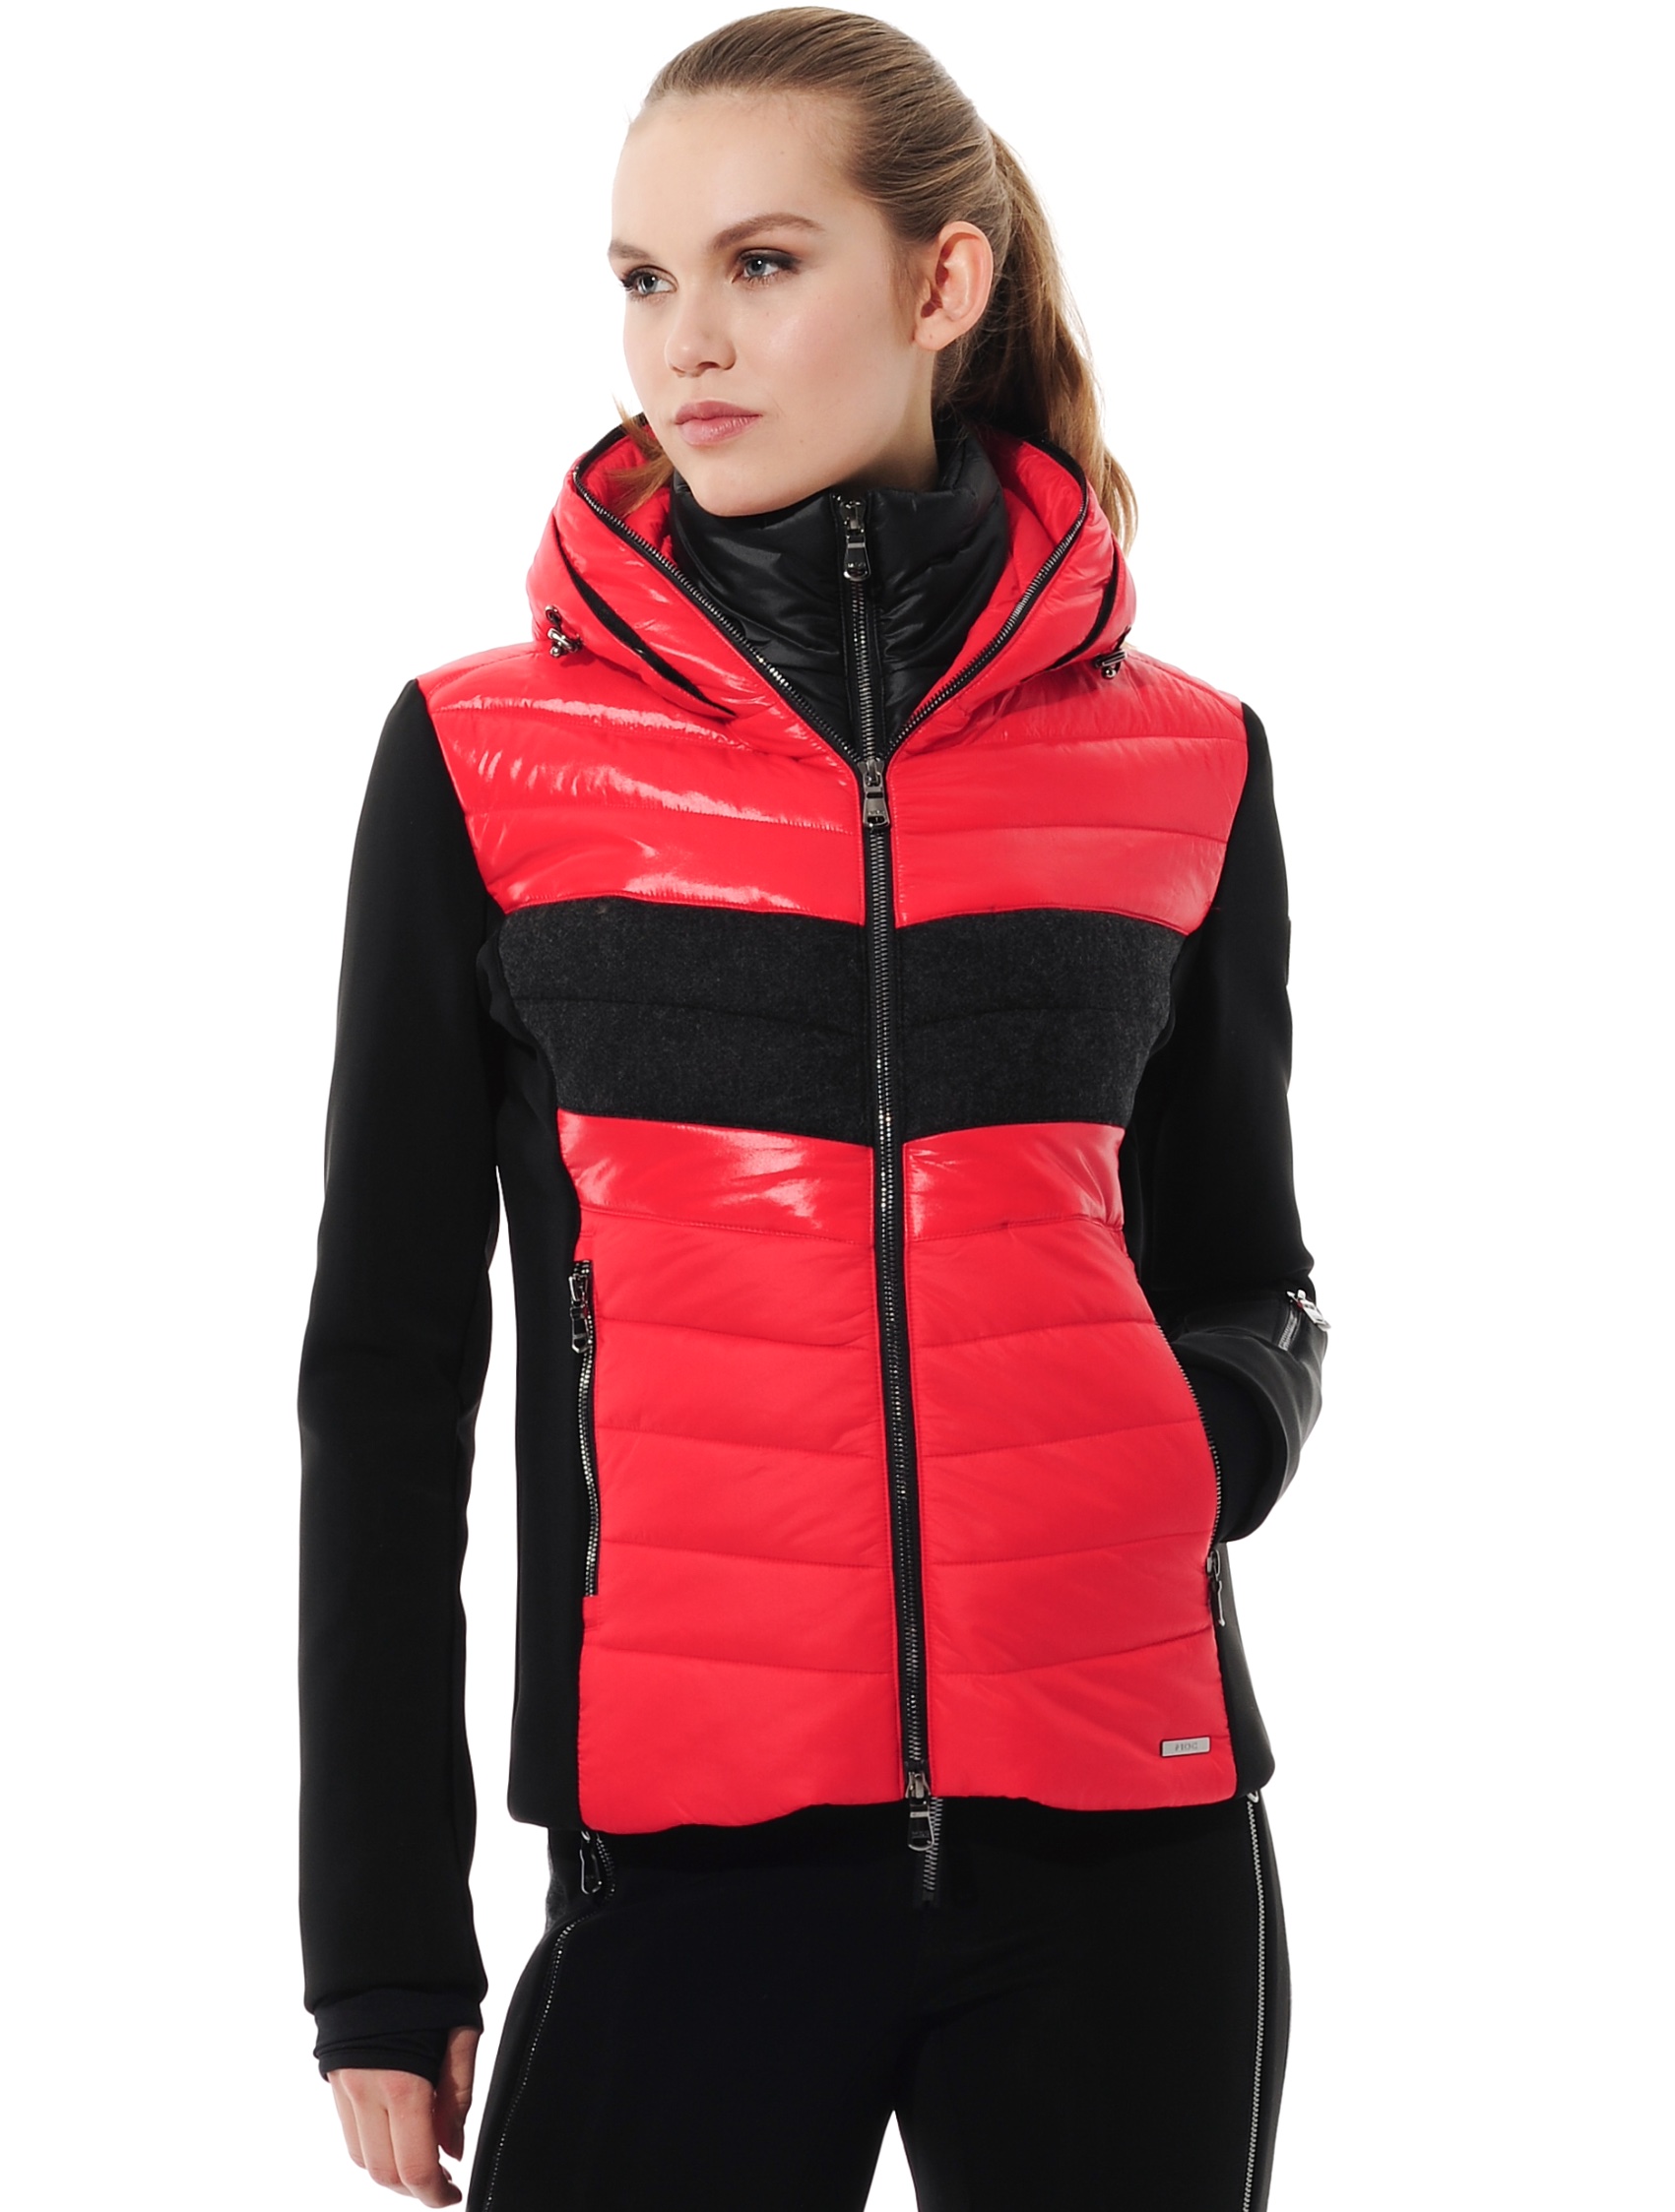 ski jacket with 4way stretch sleeves and side panels red/black 